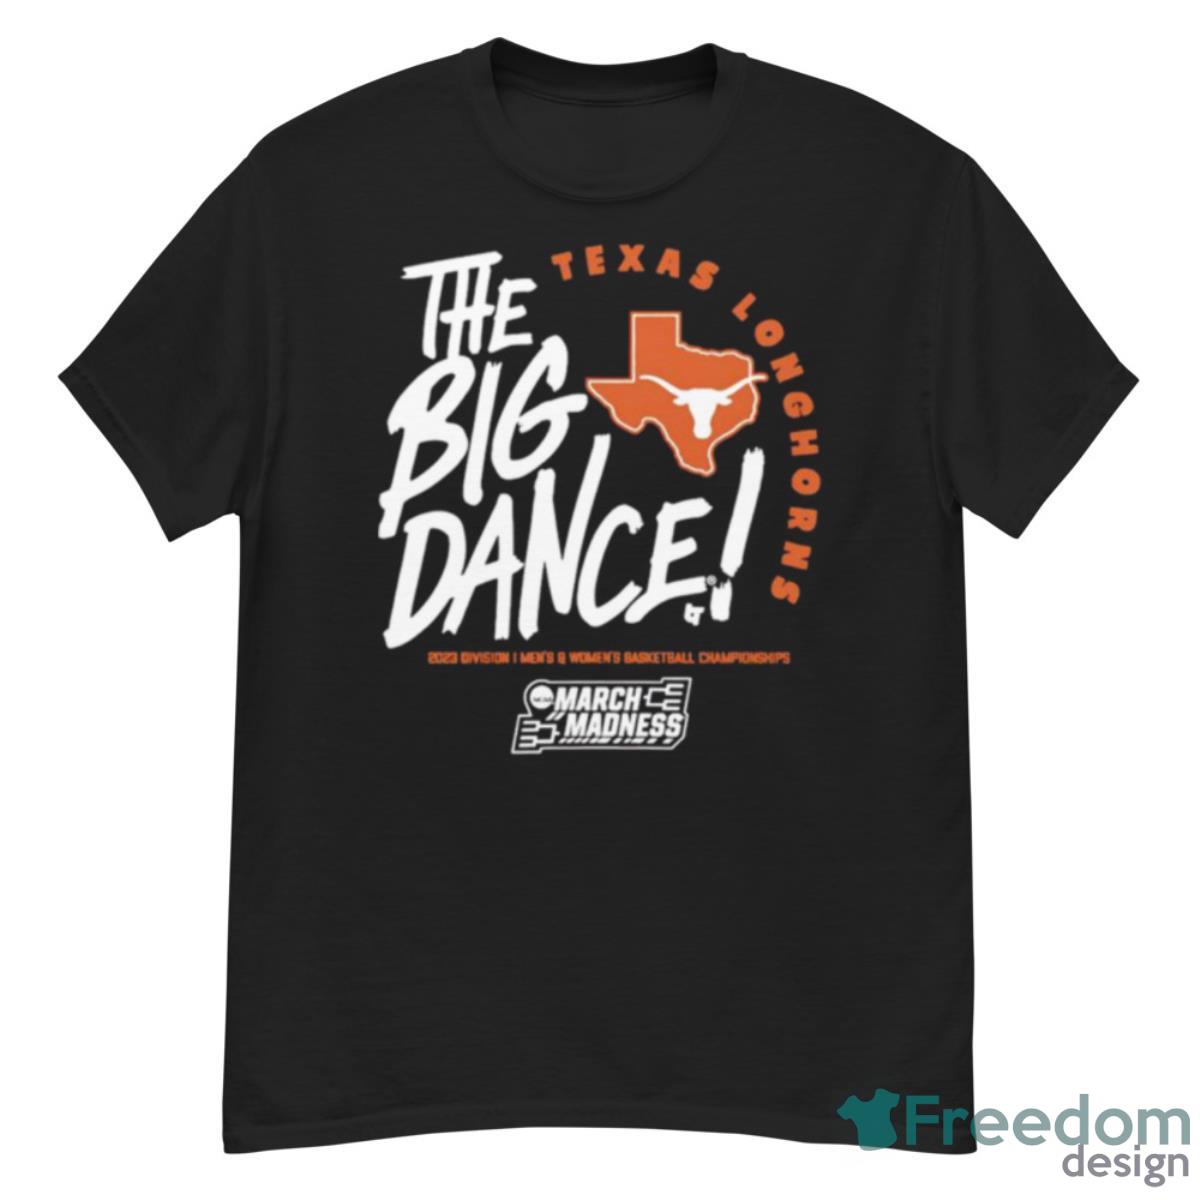 Texas Longhorns the big dance March Madness 2023 Division men’s and women’s basketball championship shirt - G500 Men’s Classic T-Shirt